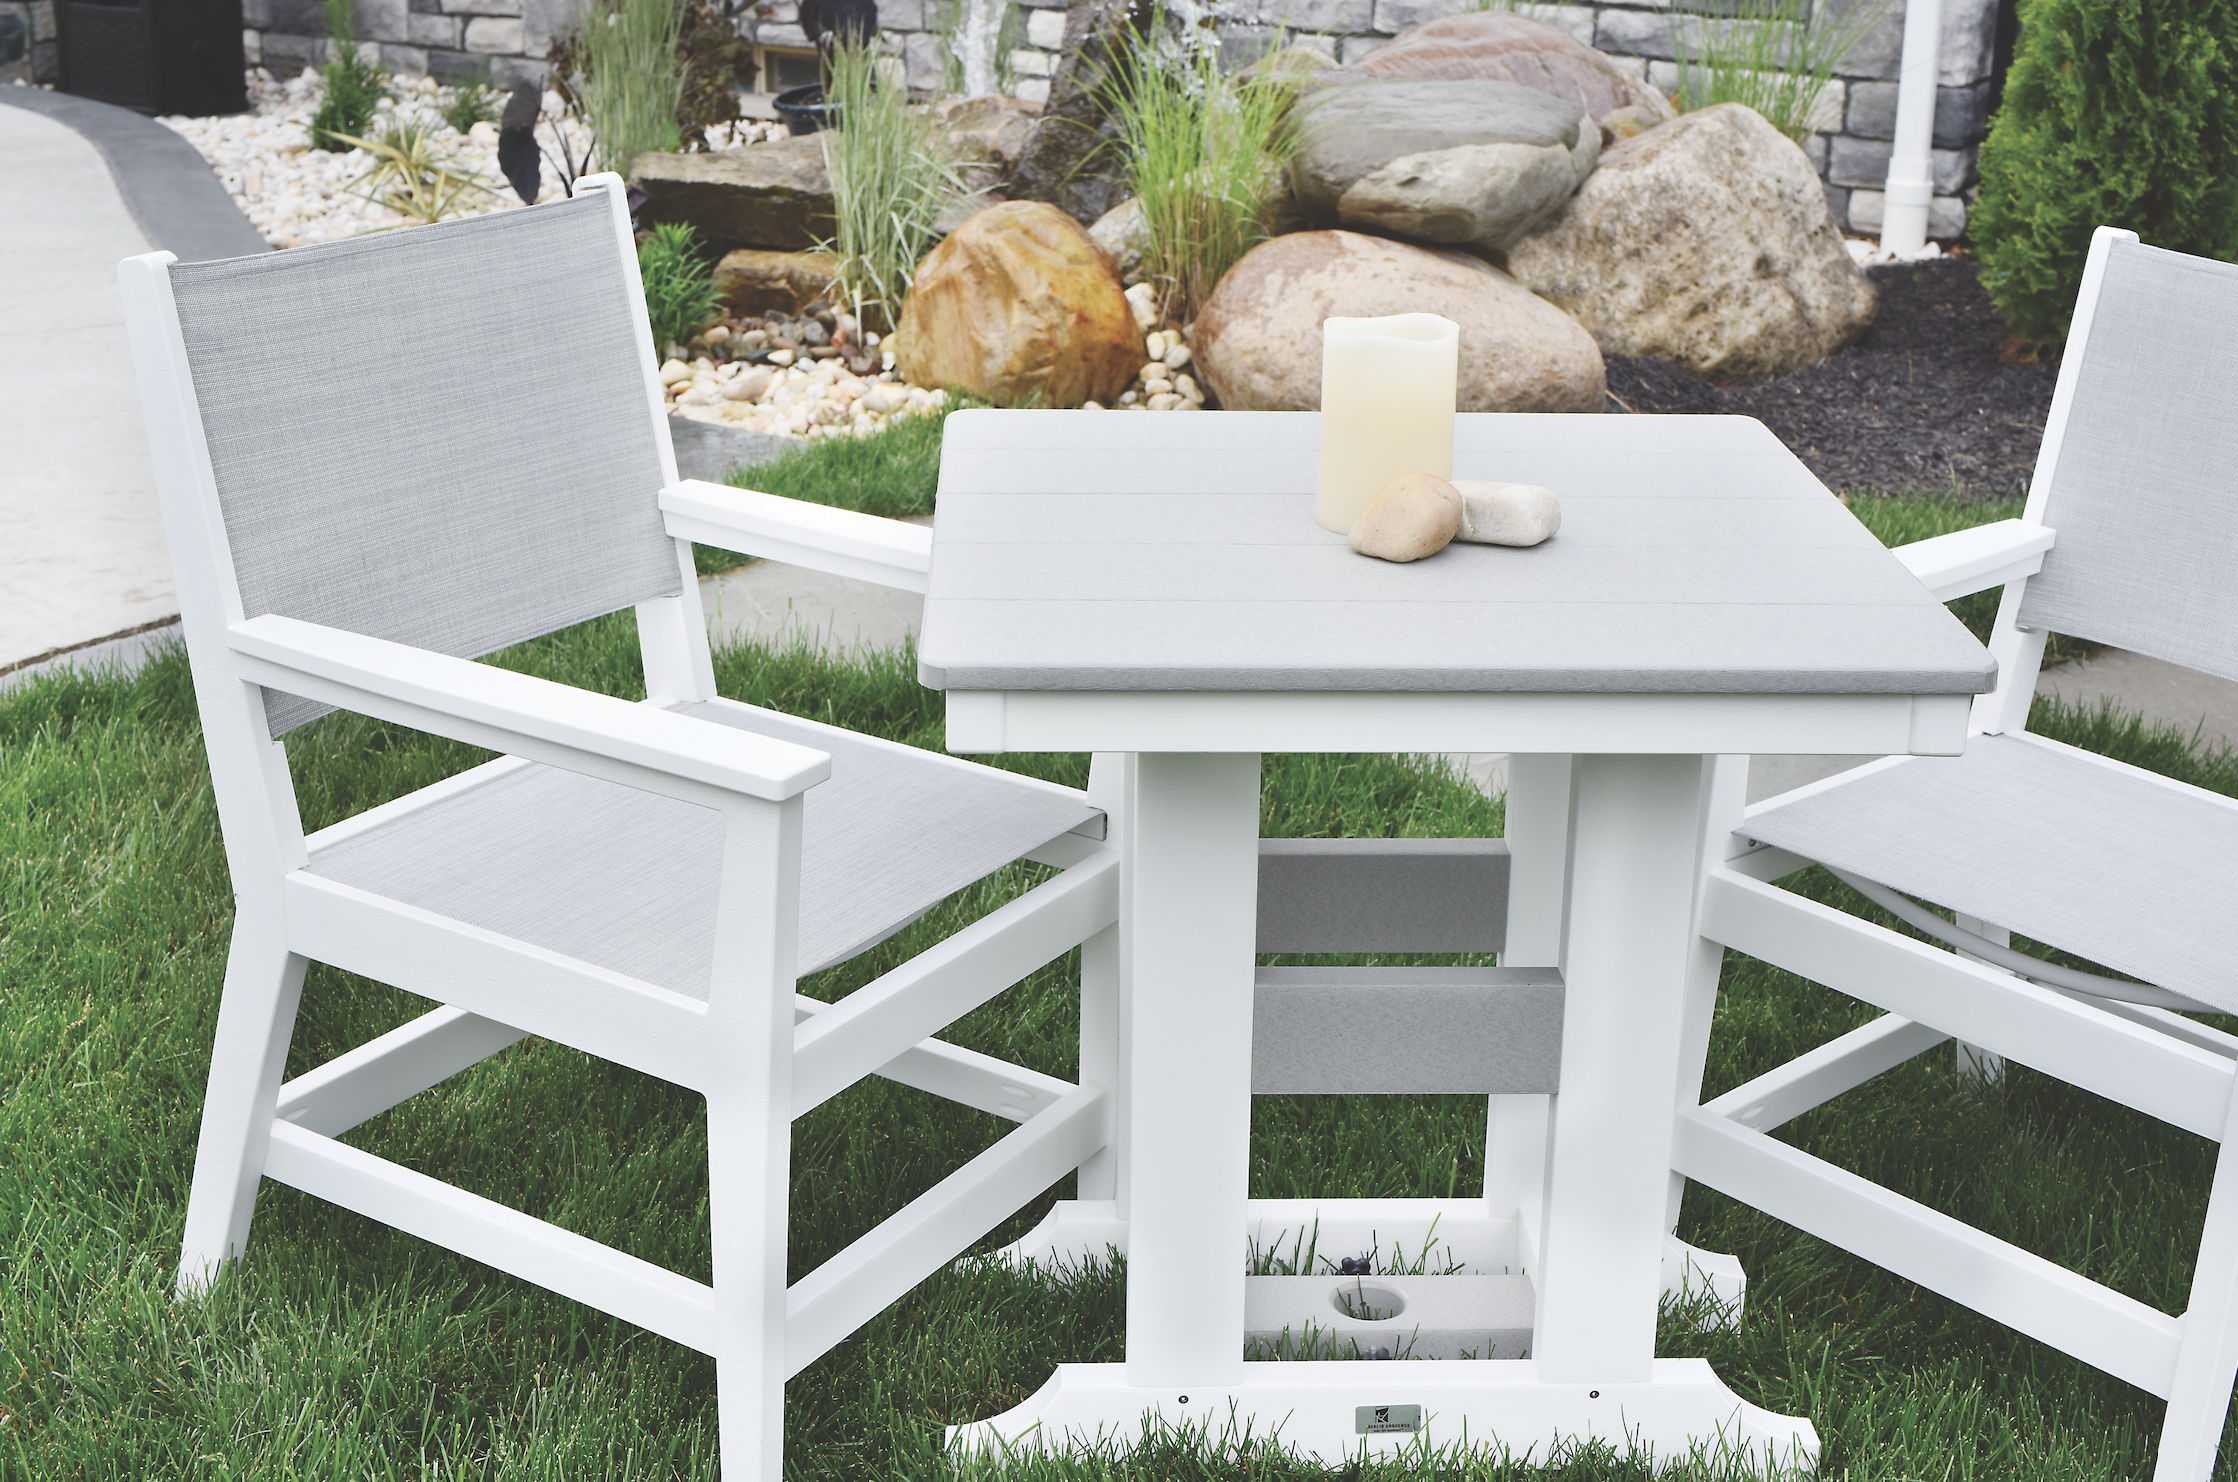  Mayhew sling dining arm chairs in white. Sling in light gray.  Square table in white and light gray. 